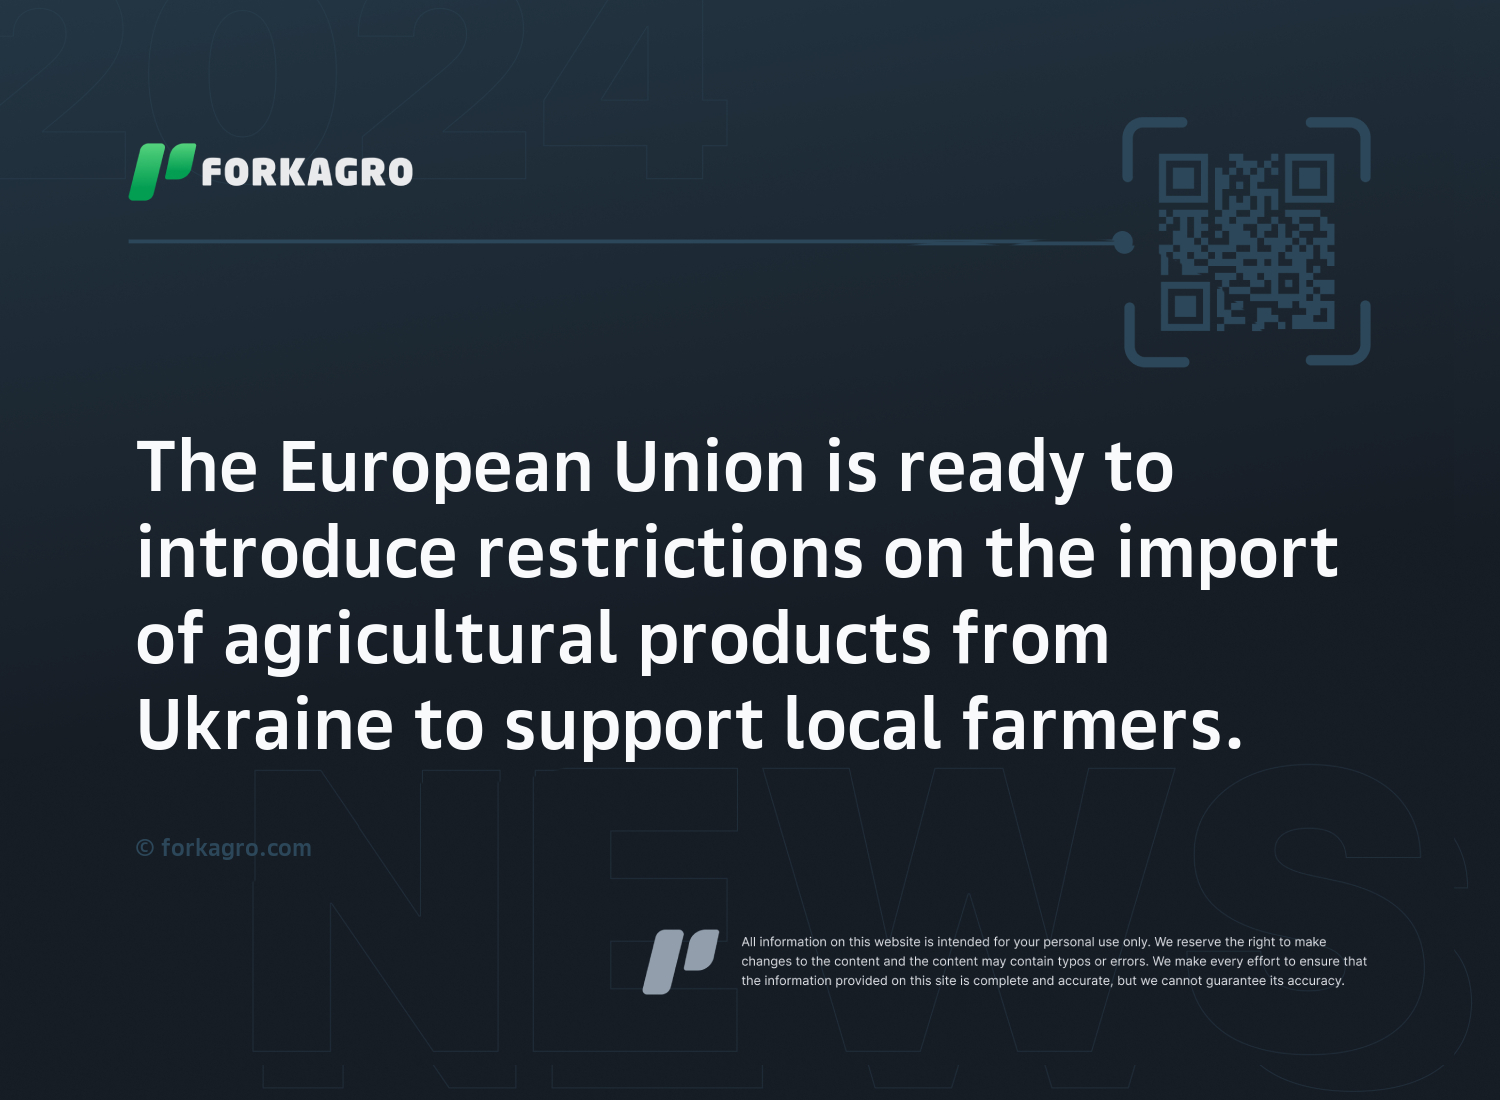 The European Union is ready to introduce restrictions on the import of agricultural products from Ukraine to support local farmers.